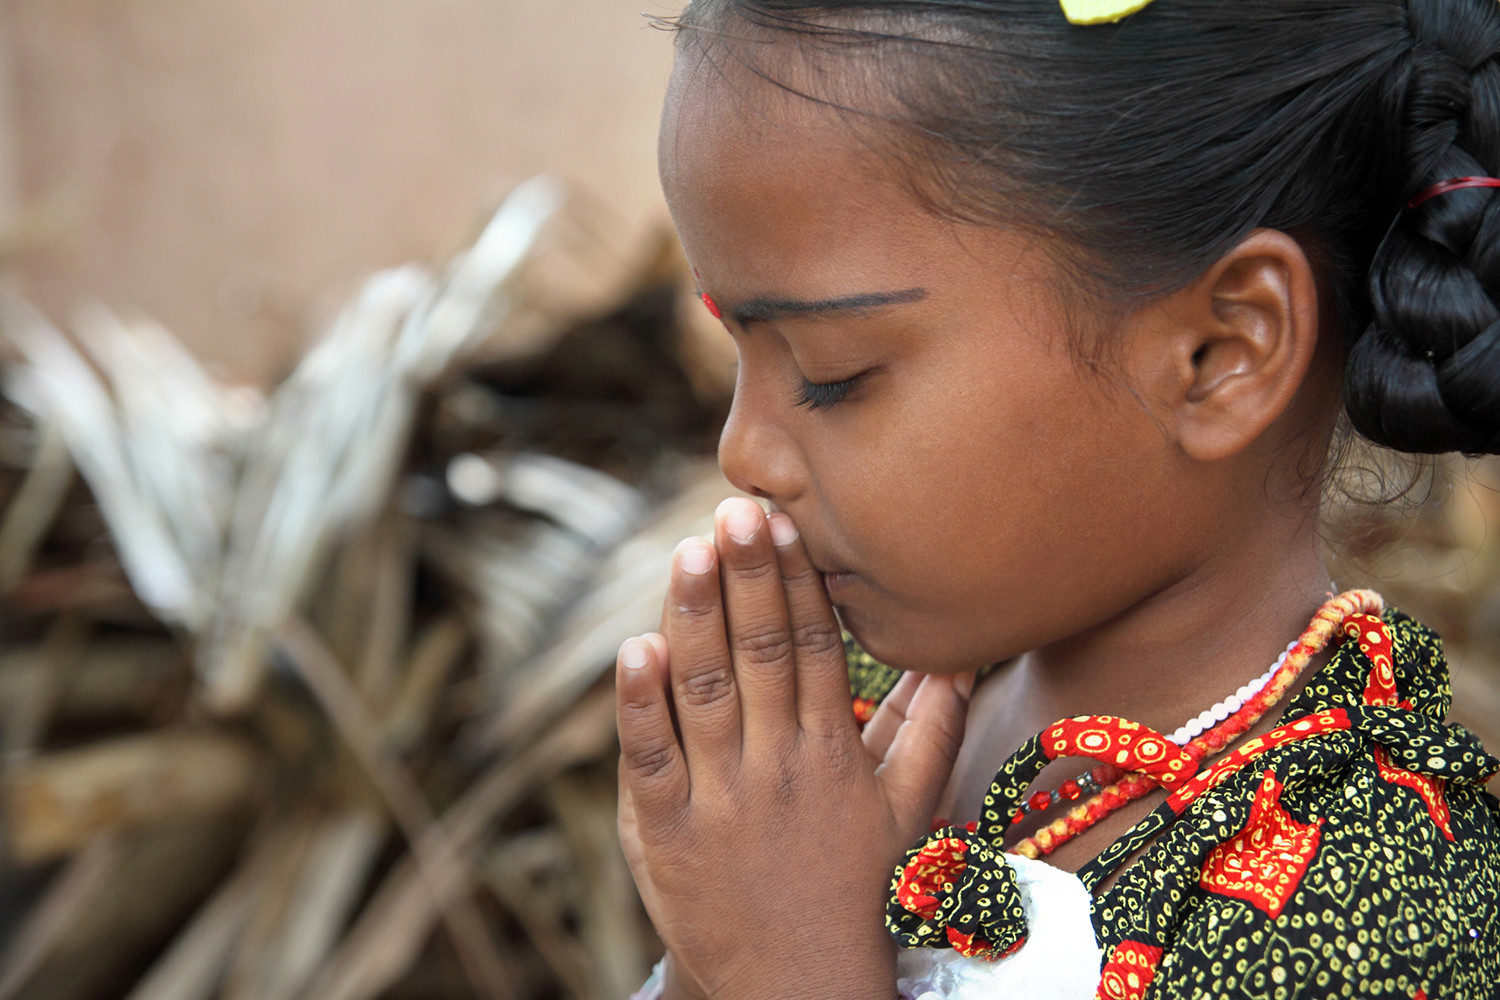 East Indian girl holds her hands together in prayer.